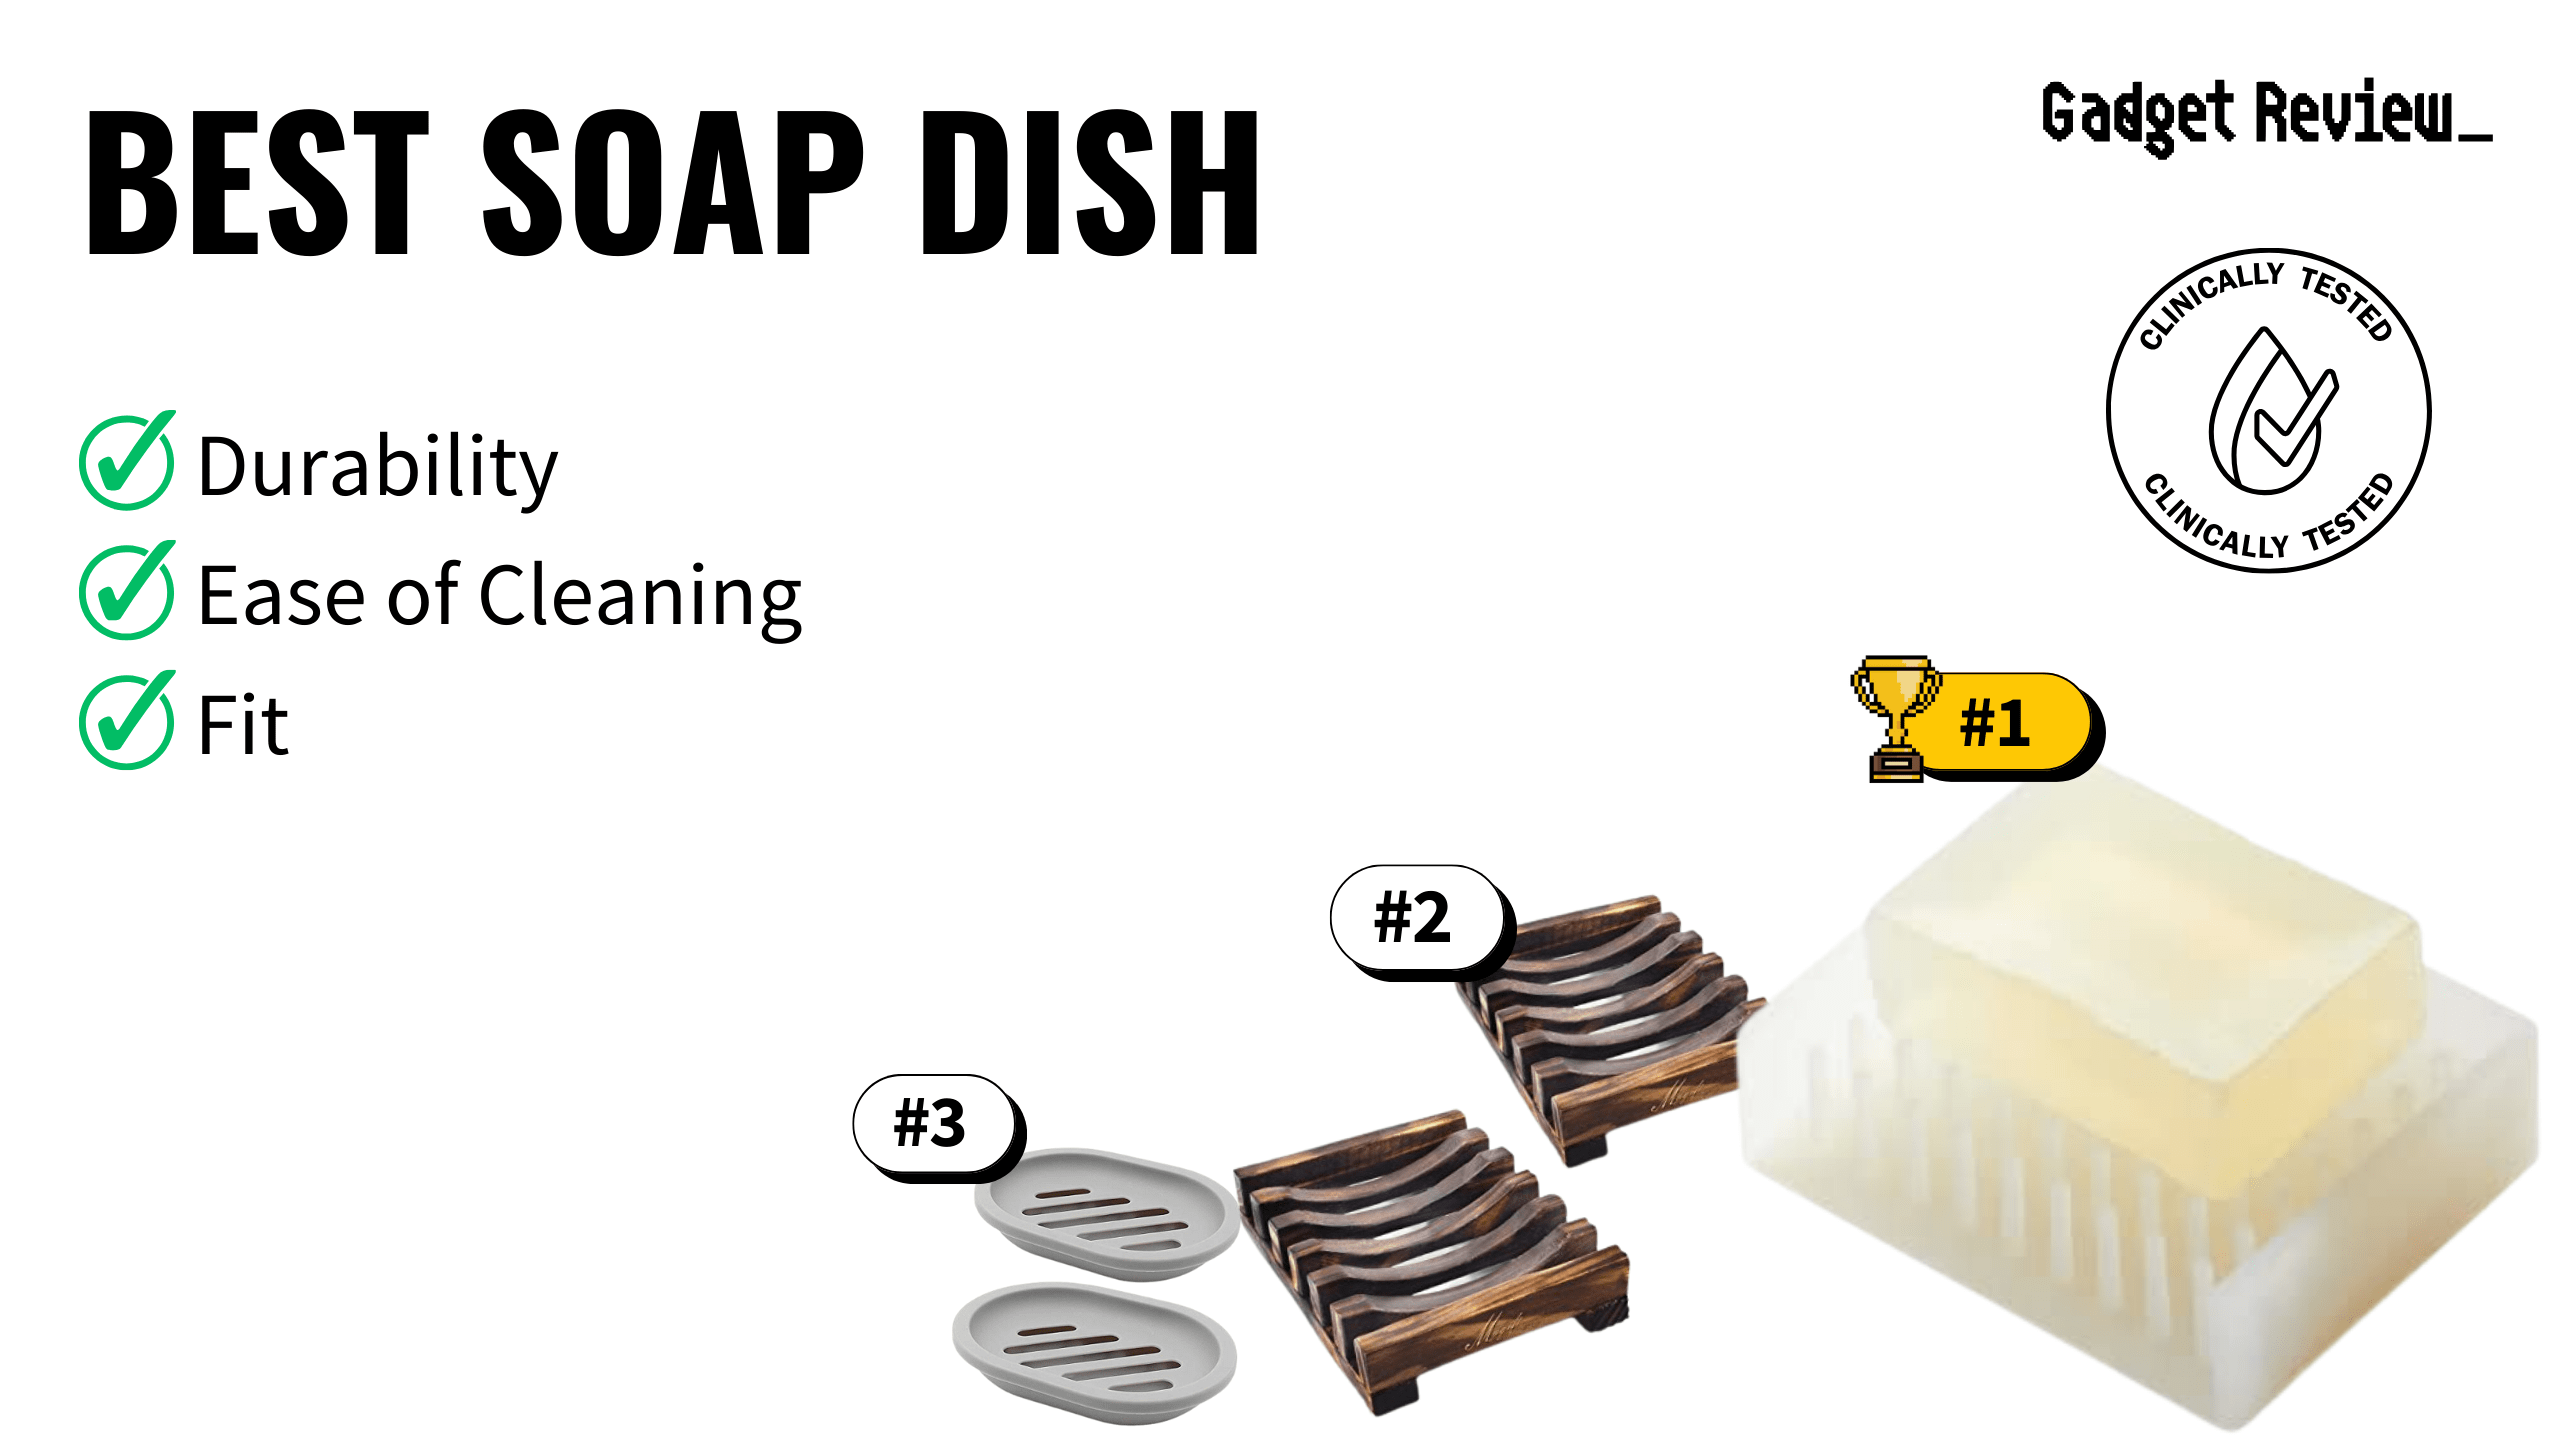 best soap dish featured image that shows the top three best kitchen product models